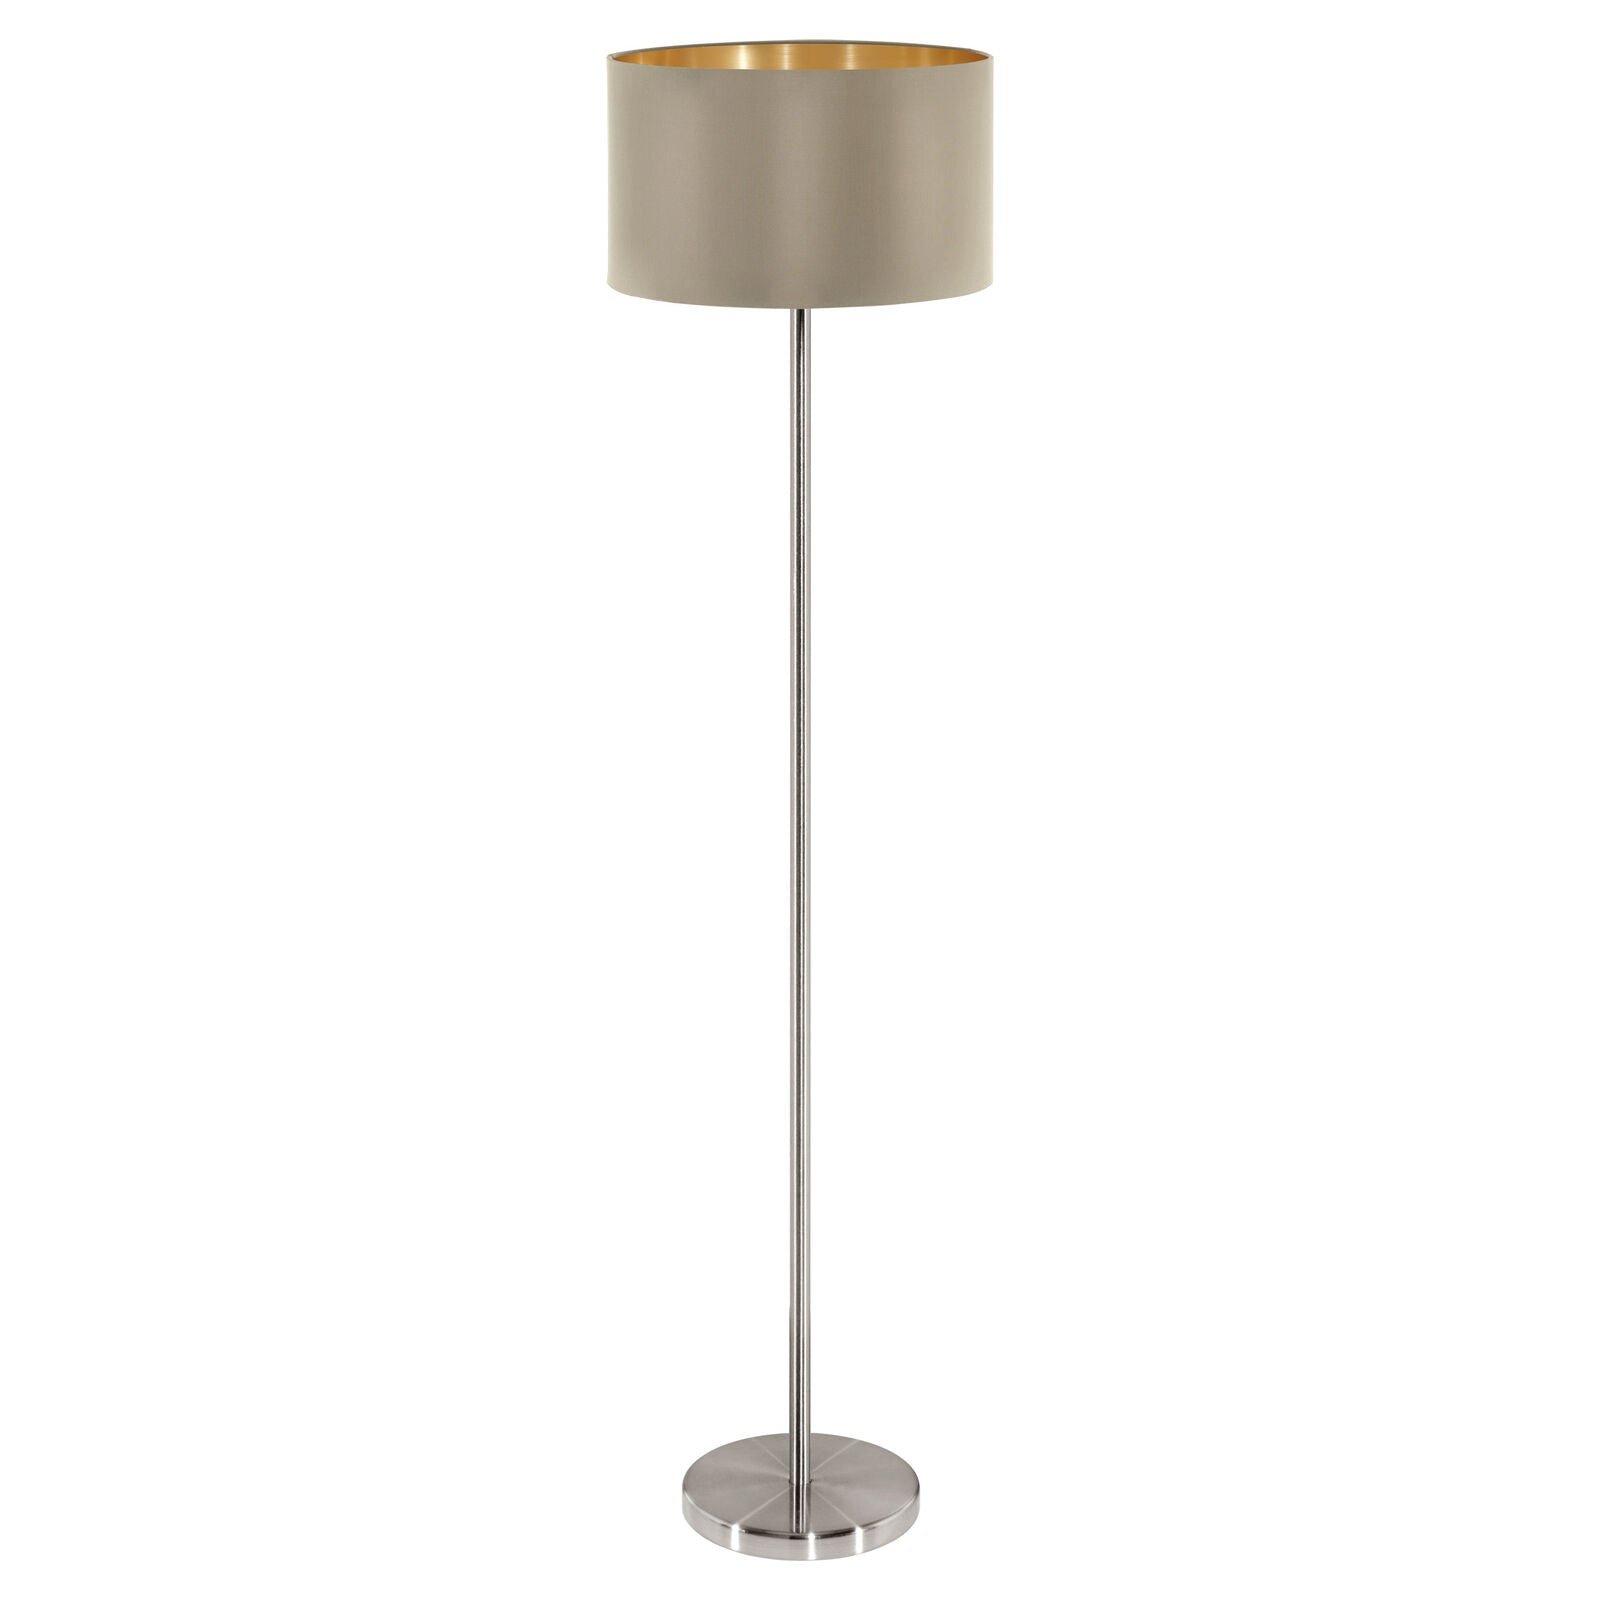 Floor Lamp Light Satin Nickel Shade Taupe Gold Fabric Pedal Switch Bulb E27